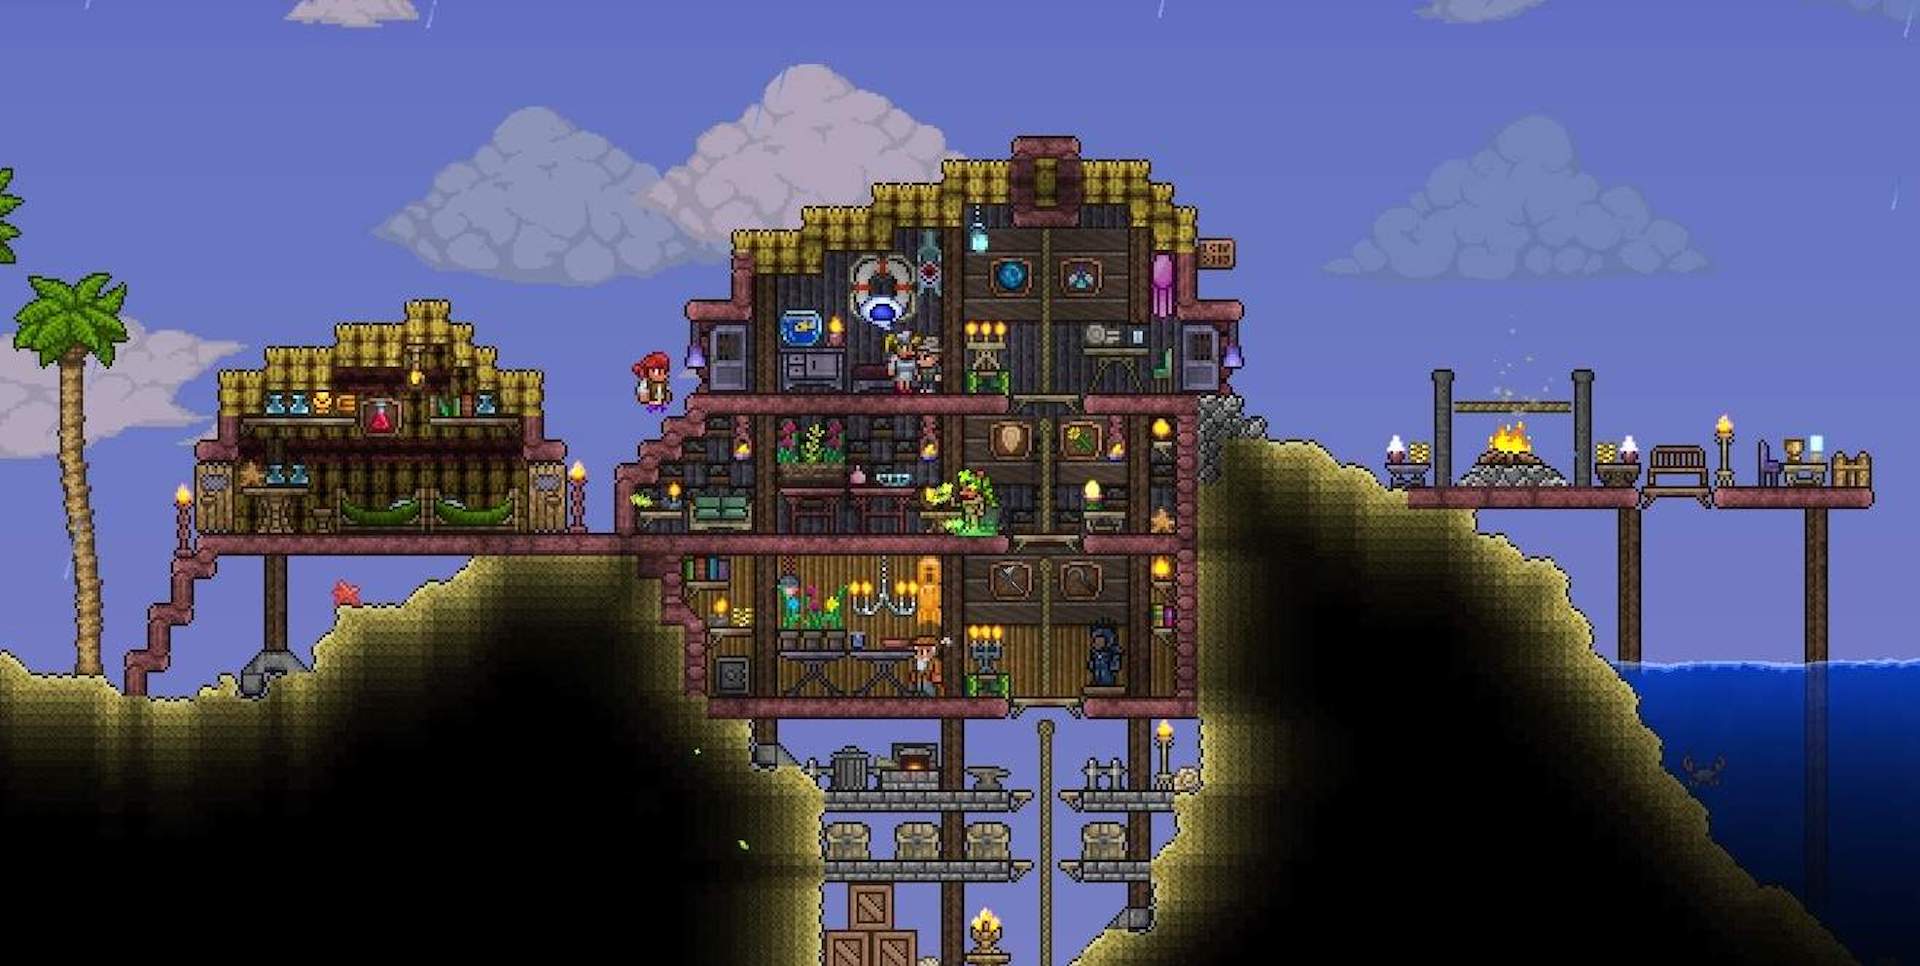 Platform terraria since the release of 1.4 for pc back in 2020. 